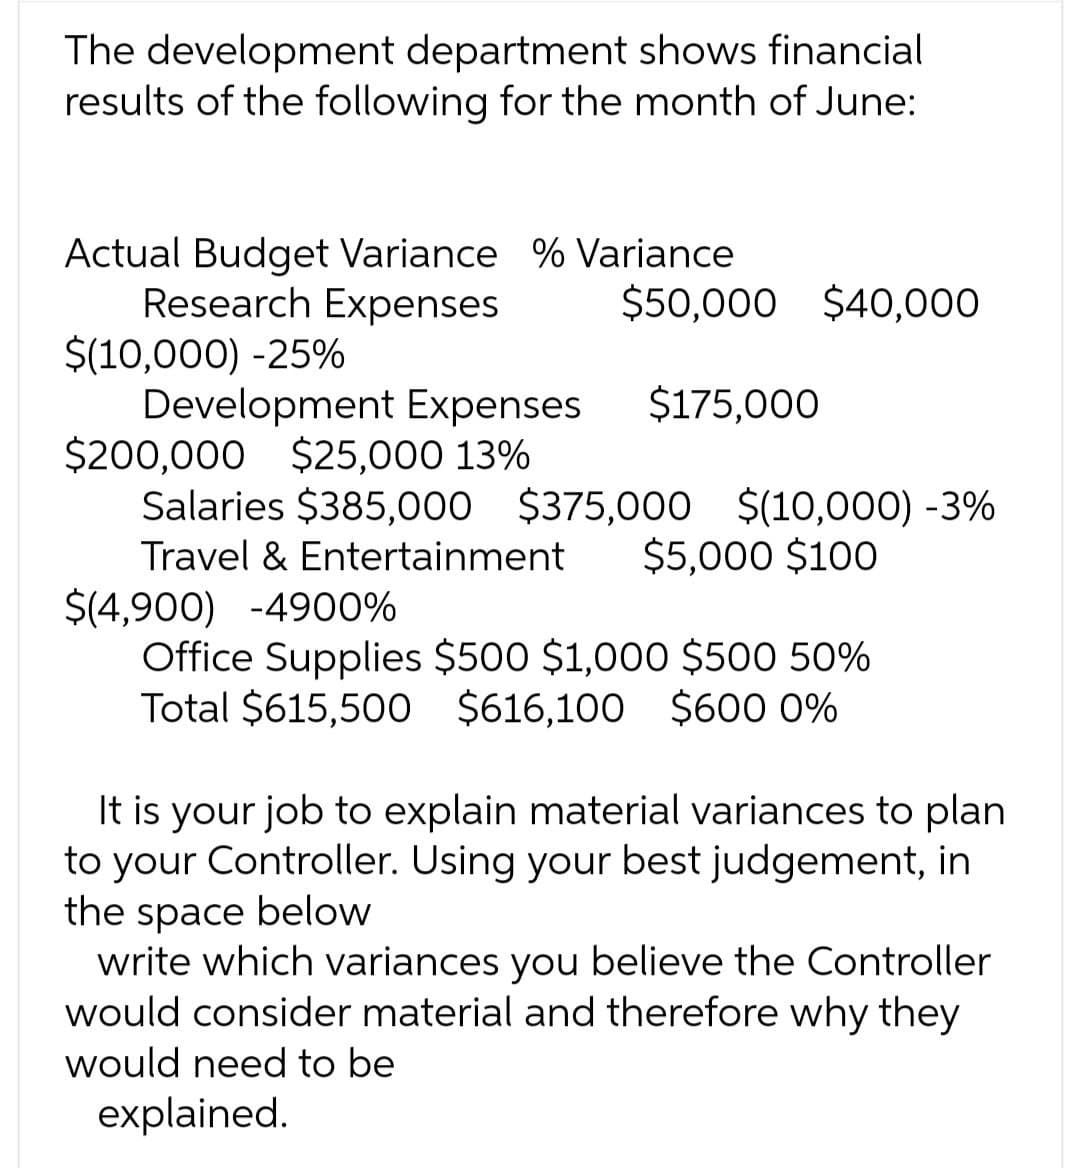 The development department shows financial
results of the following for the month of June:
Actual Budget Variance % Variance
Research Expenses
$50,000 $40,000
$(10,000) -25%
Development Expenses $175,000
$200,000 $25,000 13%
Salaries $385,000 $375,000 $(10,000) -3%
Travel & Entertainment $5,000 $100
$(4,900) -4900%
Office Supplies $500 $1,000 $500 50%
Total $615,500 $616,100 $600 0%
It is your job to explain material variances to plan
to your Controller. Using your best judgement, in
the space below
write which variances you believe the Controller
would consider material and therefore why they
would need to be
explained.